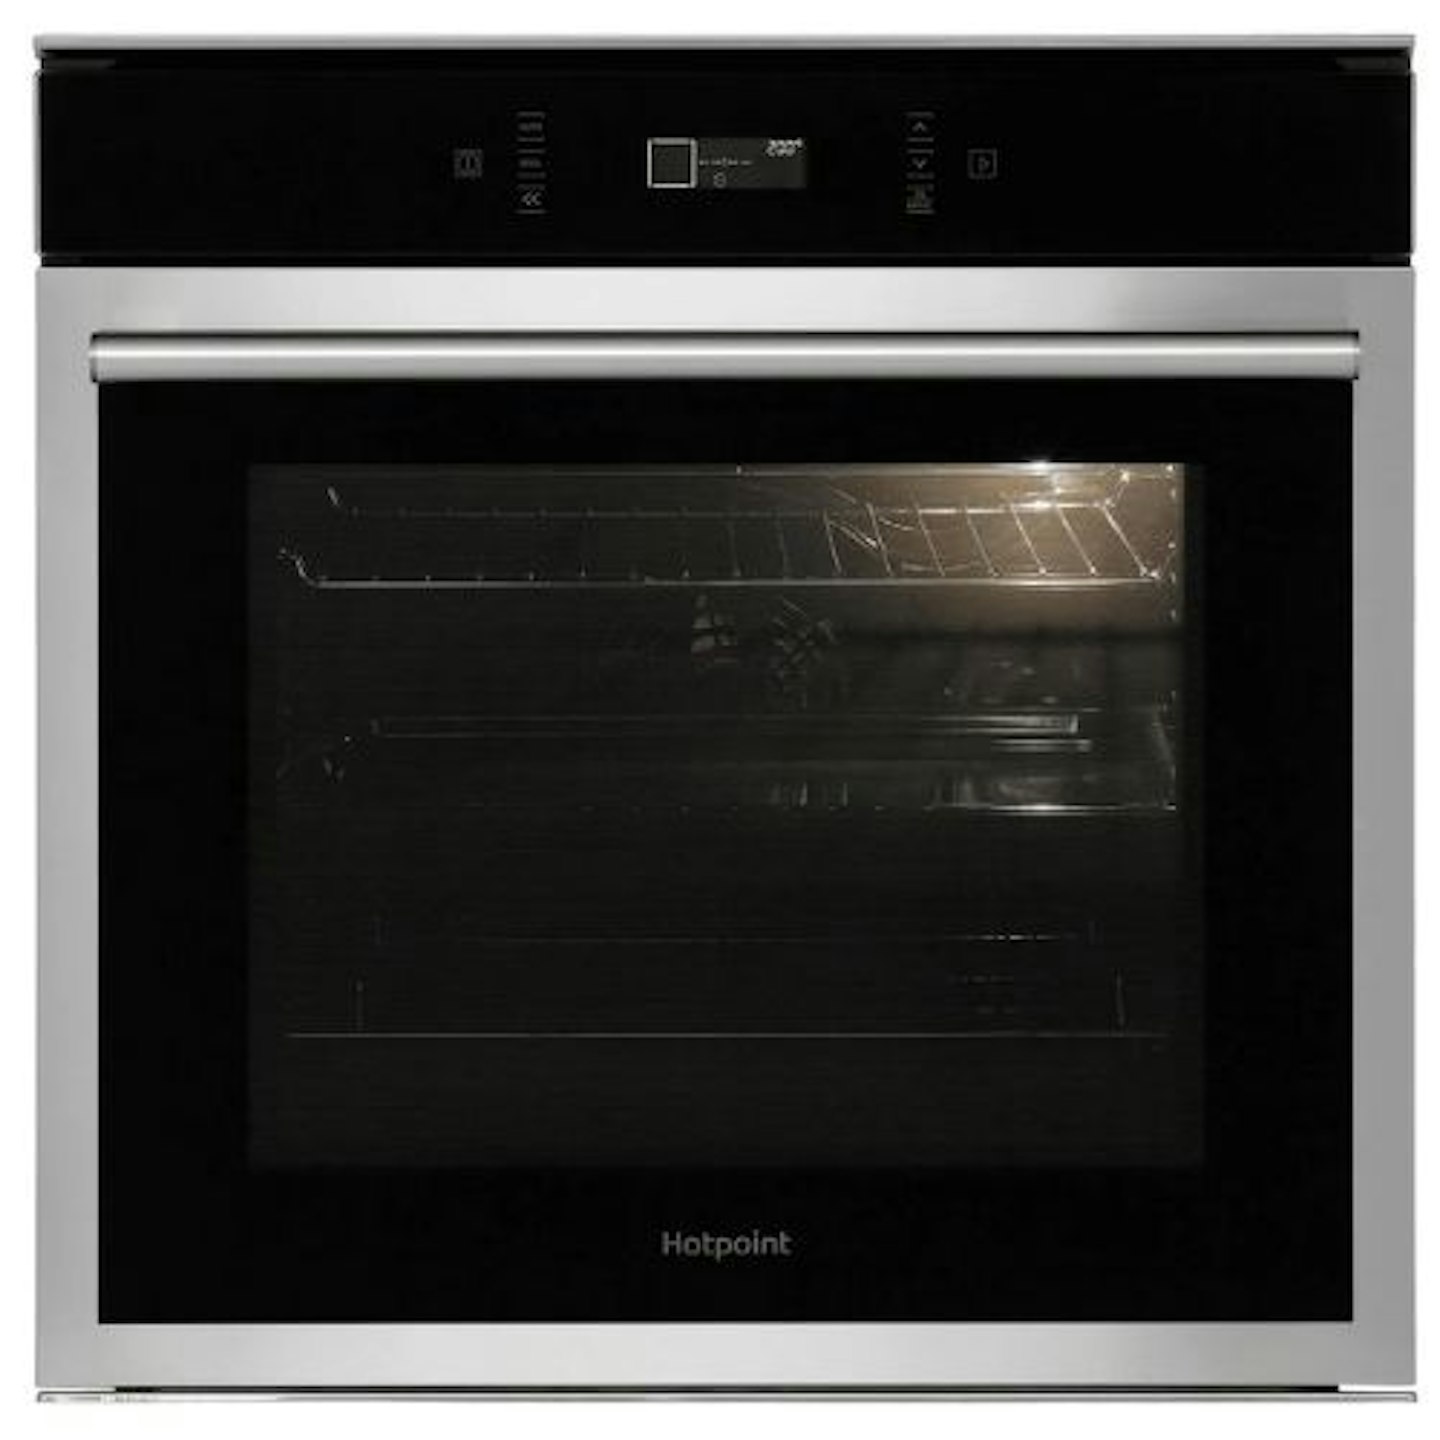 Hotpoint Class 6 SI6 874 SH IX Single Built-In Oven